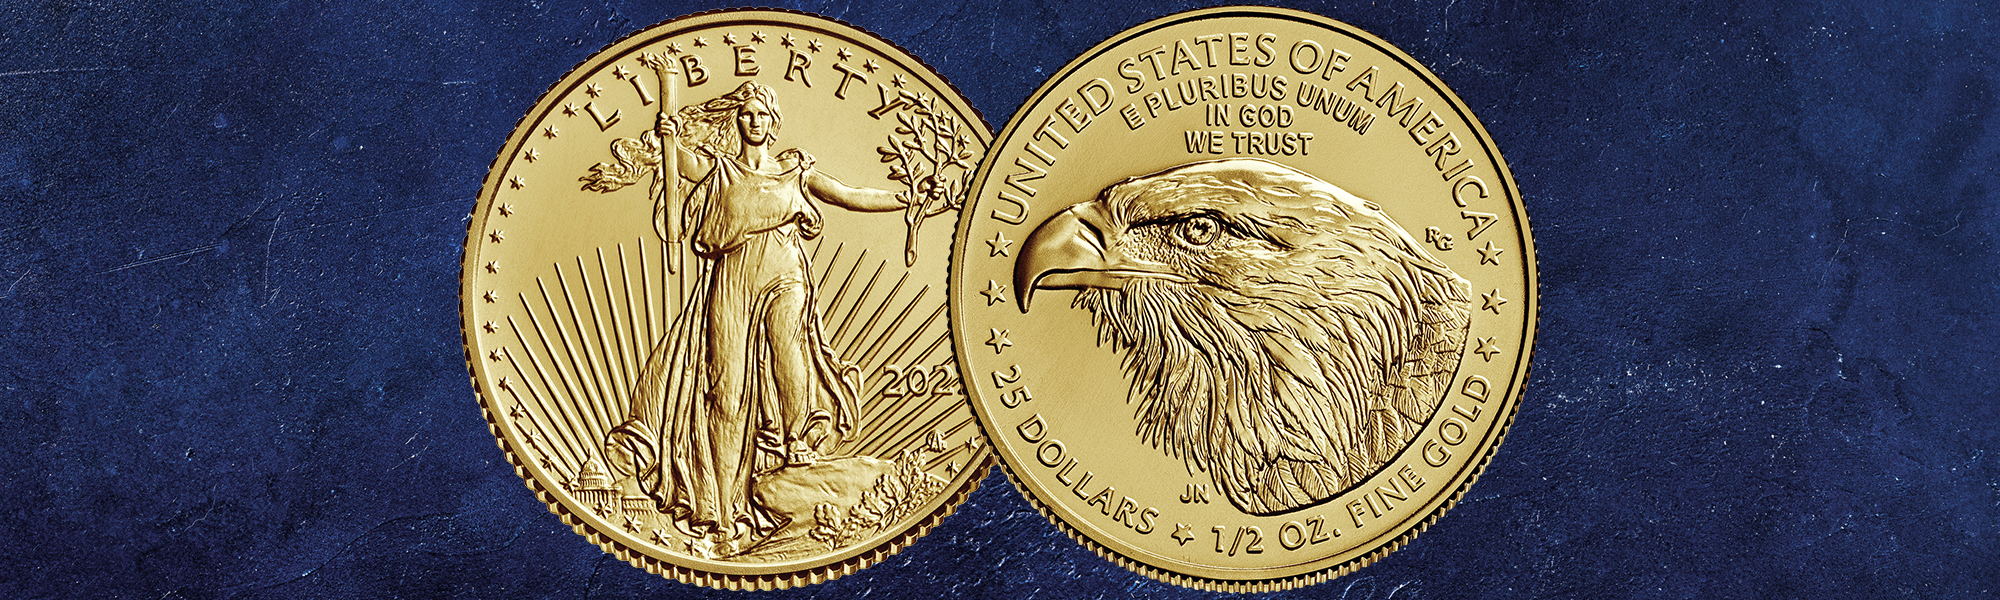 https://www.preciousmetals.com/media/mageplaza/blog/post/i/p/ipm-blog-how-much-is-a-gold-eagle-coin-worth-2000x600_1.jpg